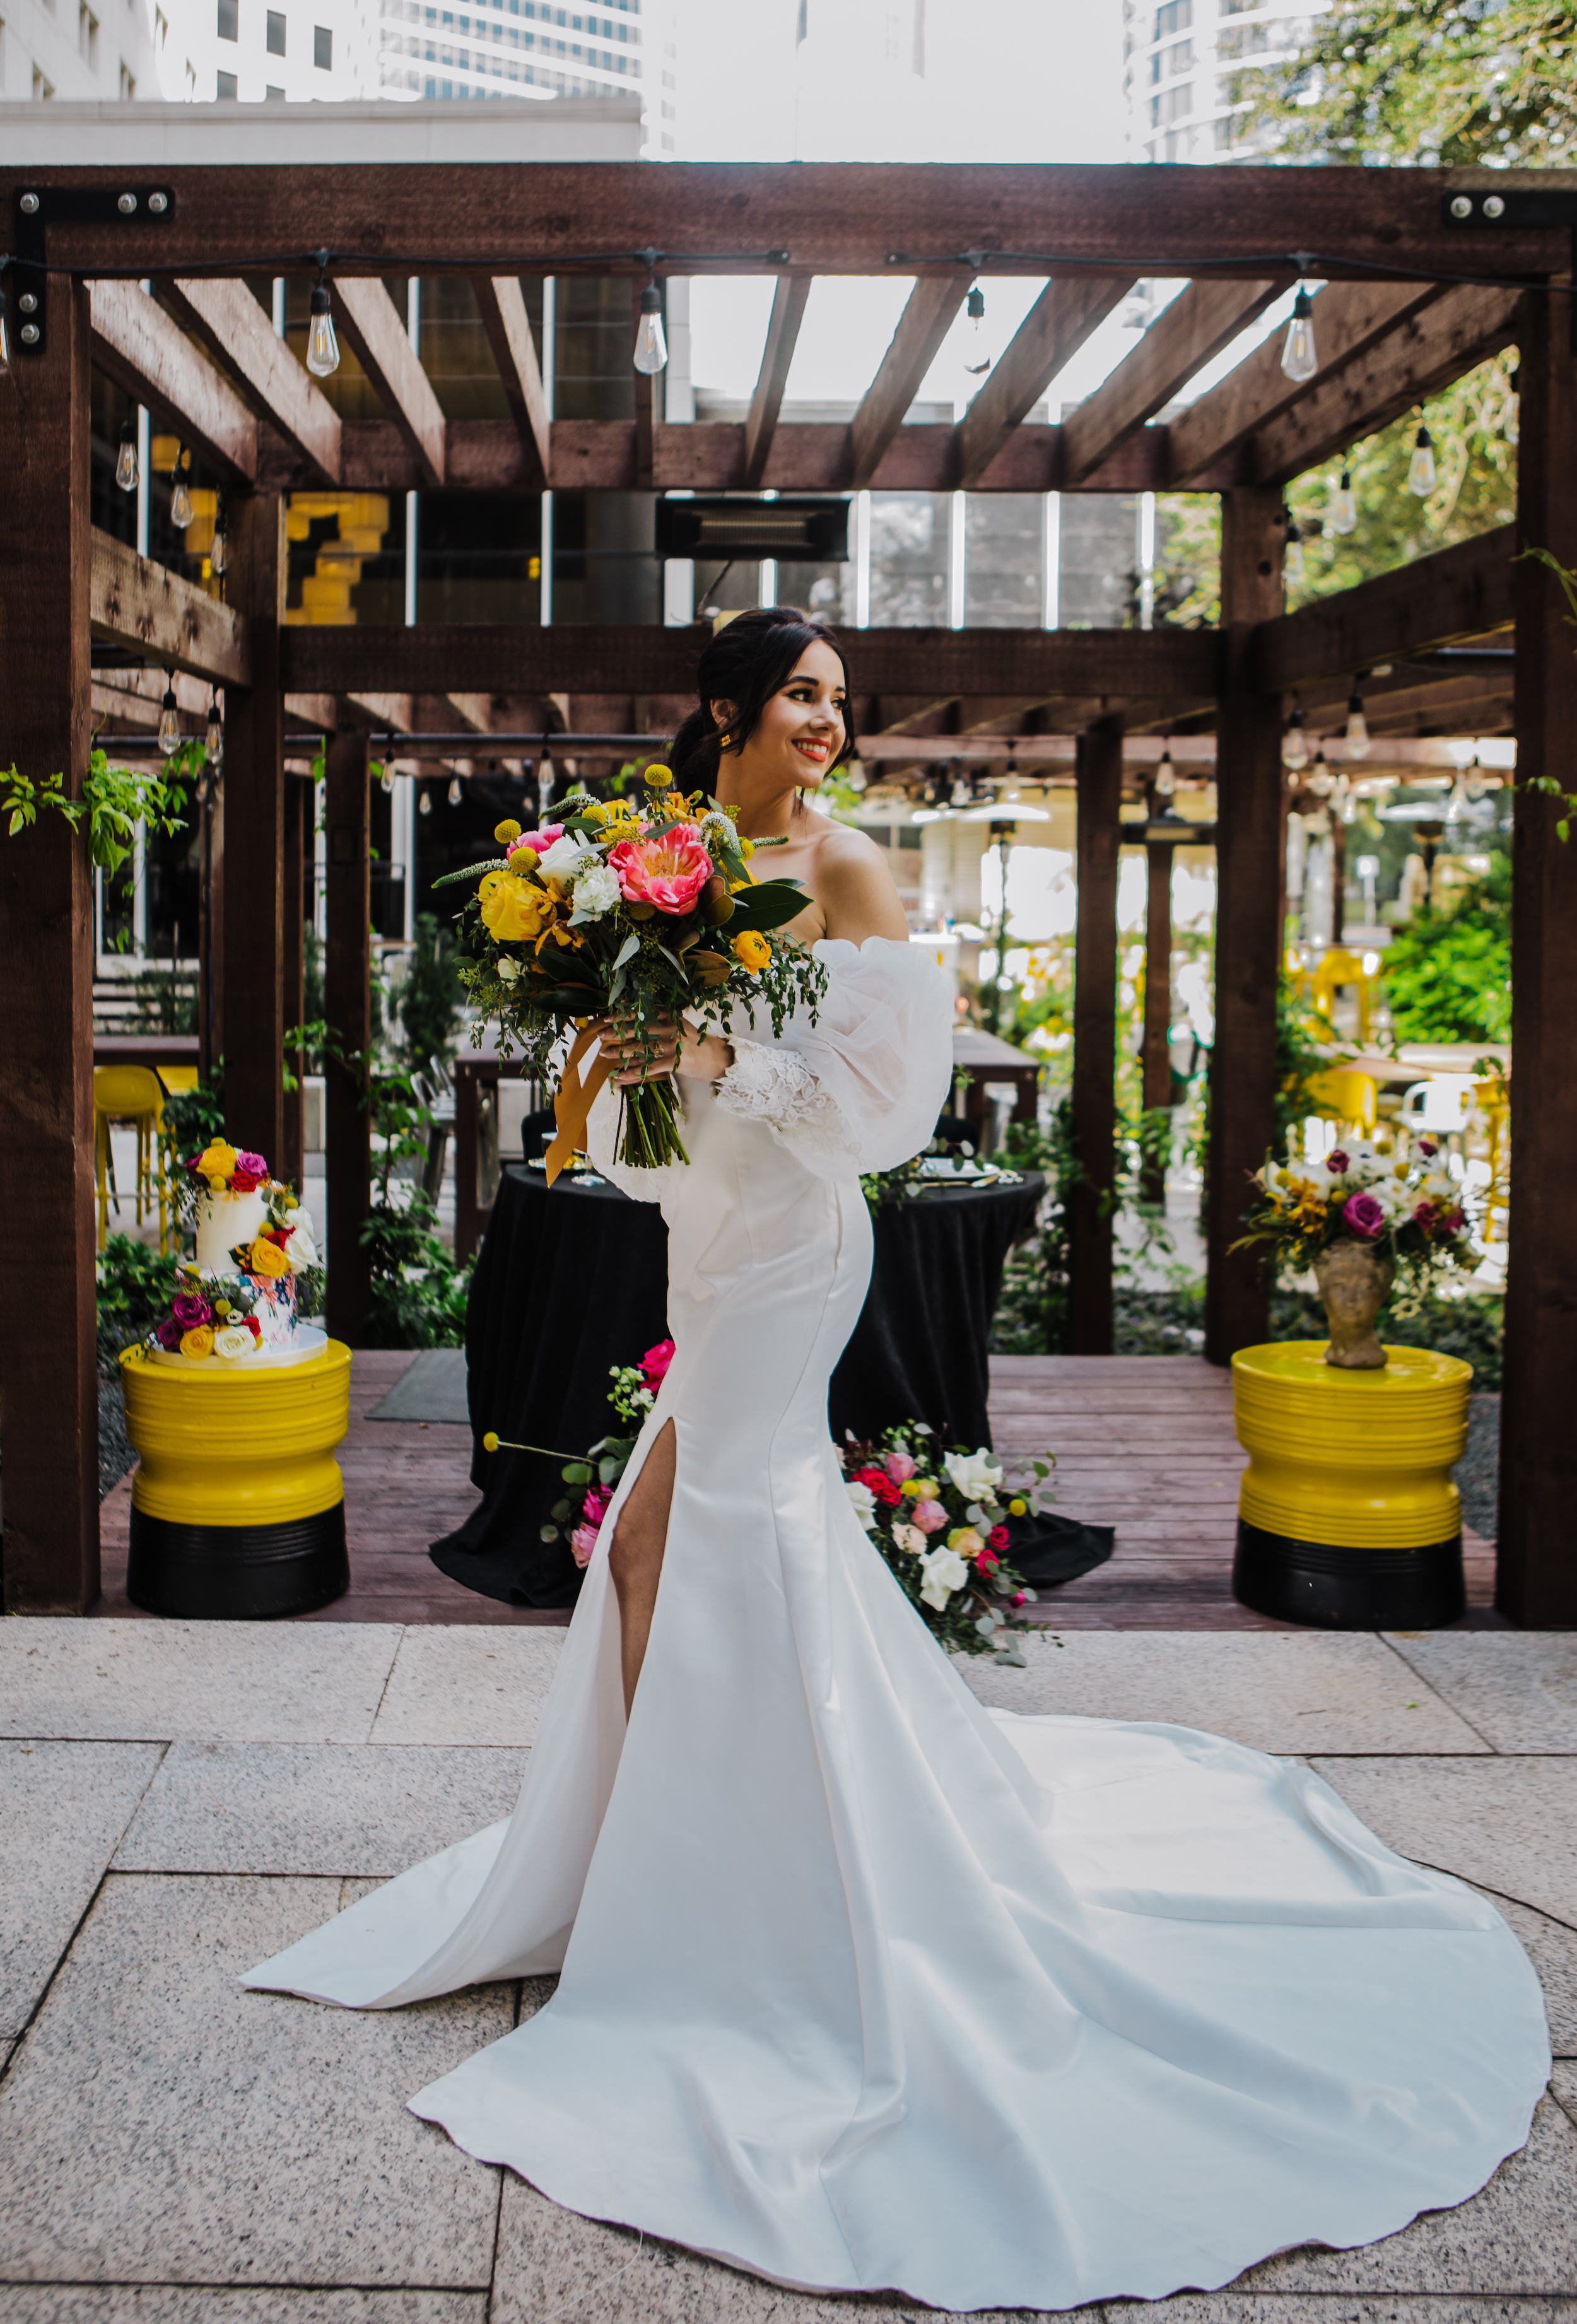 A bride smiles in a sleek off-the-shoulder gown by Kary King Boutique, holding a colorful bridal bouquet with yellow and pink flowers on the outdoor courtyard at a downtown Houston wedding venue. 